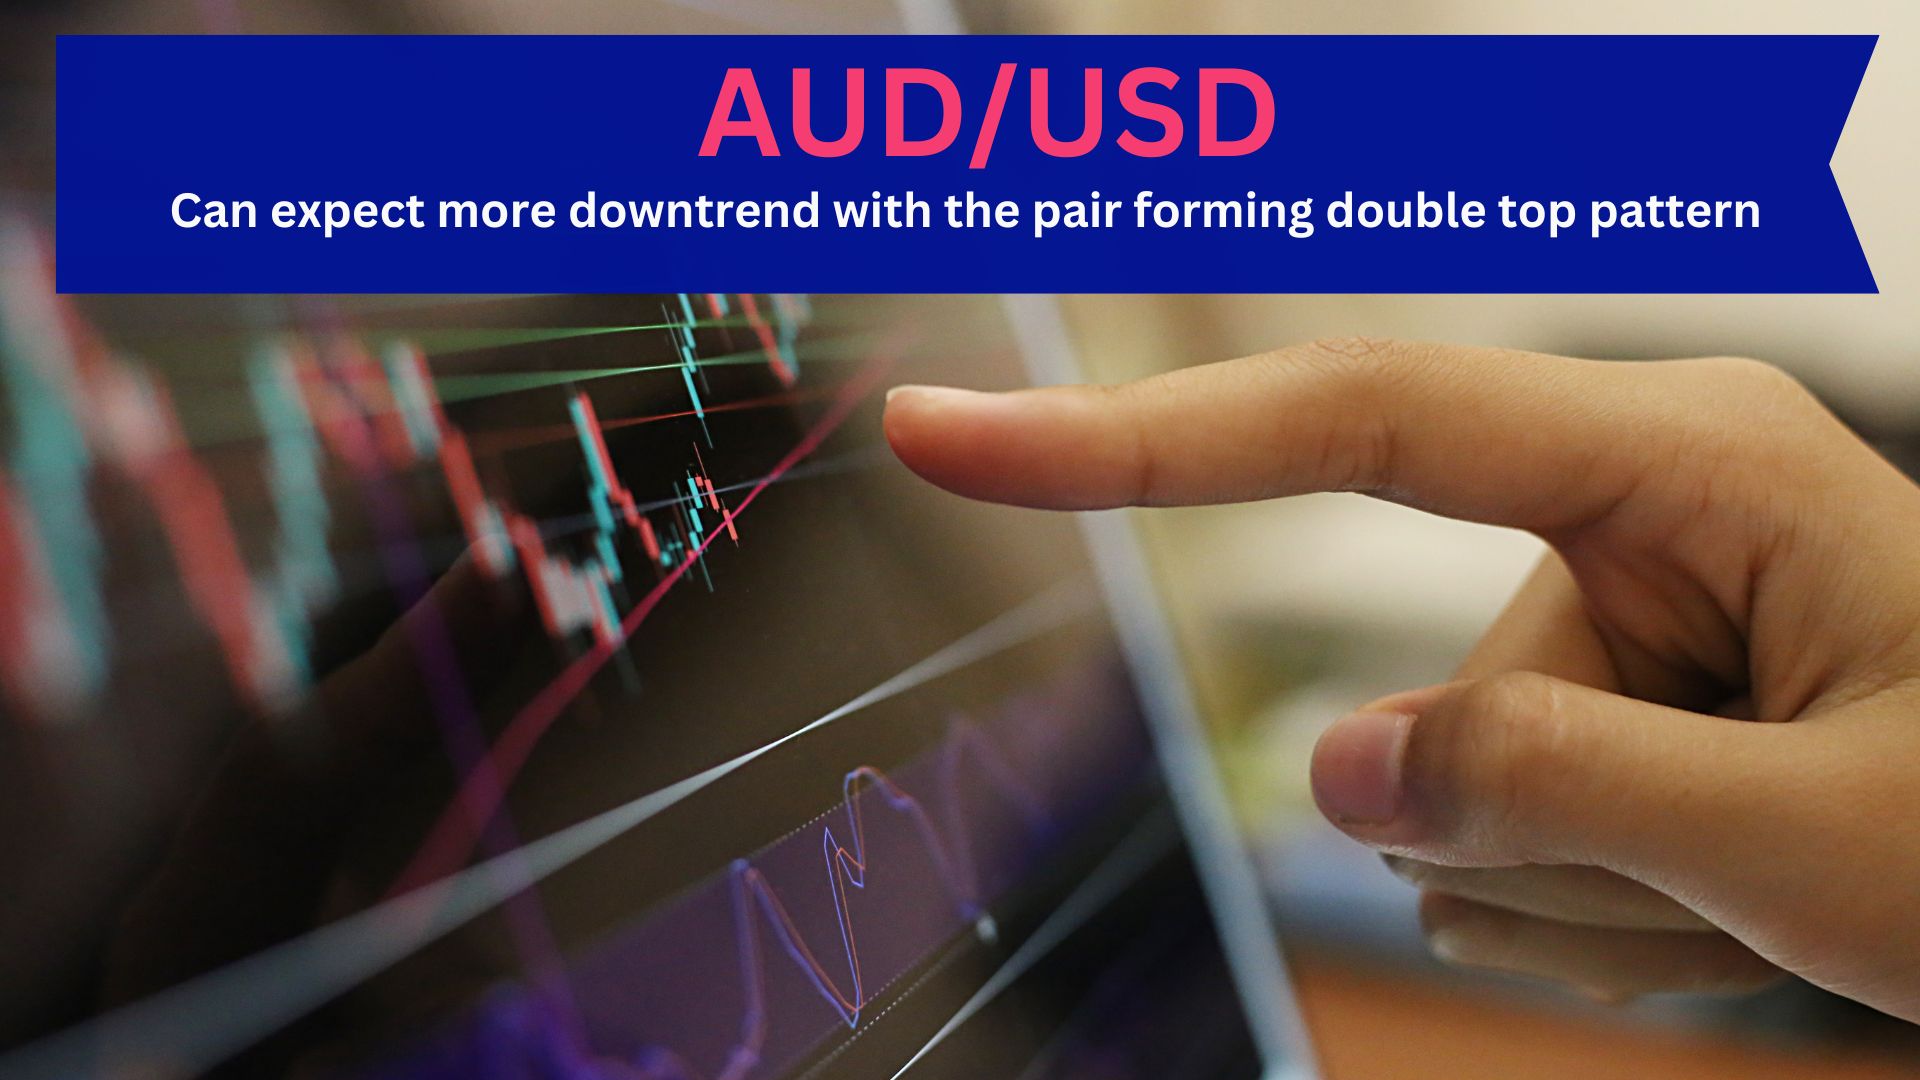 Can Expect More Downtrend With the Pair Forming Double Top Pattern